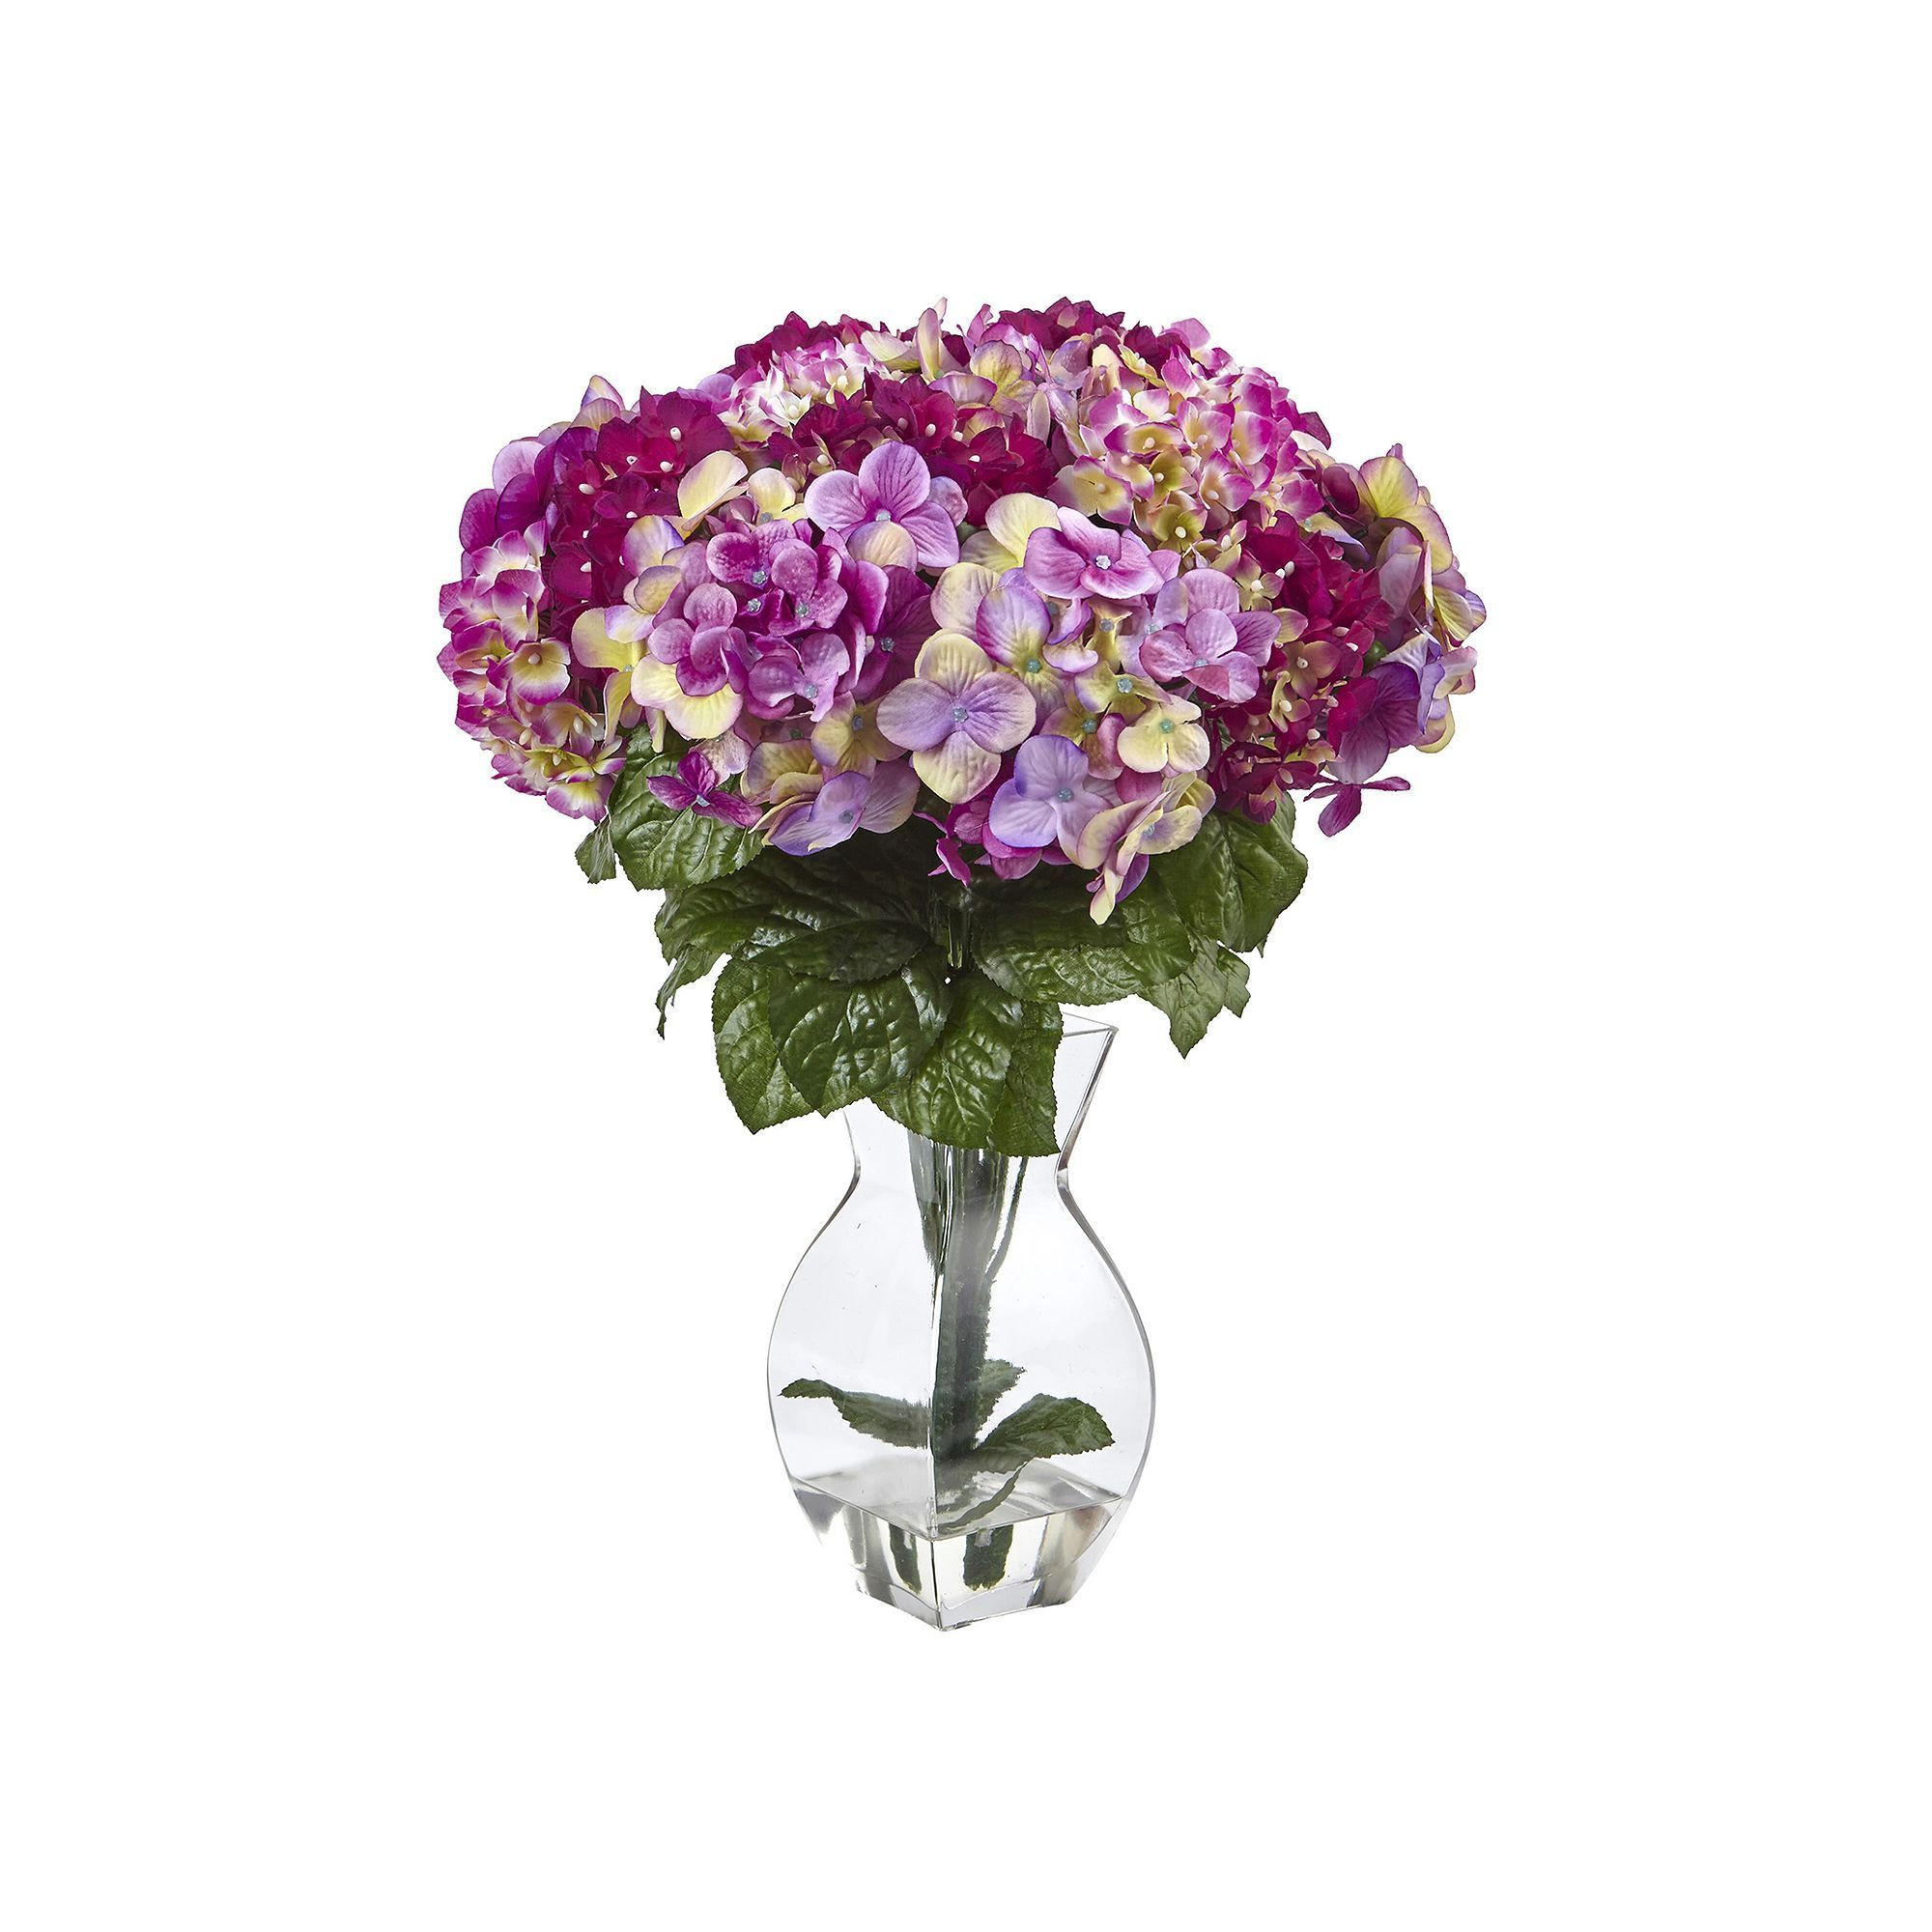 24 Perfect White Hydrangea In Glass Vase 2024 free download white hydrangea in glass vase of nearly natural beauty hydrangea artificial floral arrangement for nearly natural beauty hydrangea artificial floral arrangement